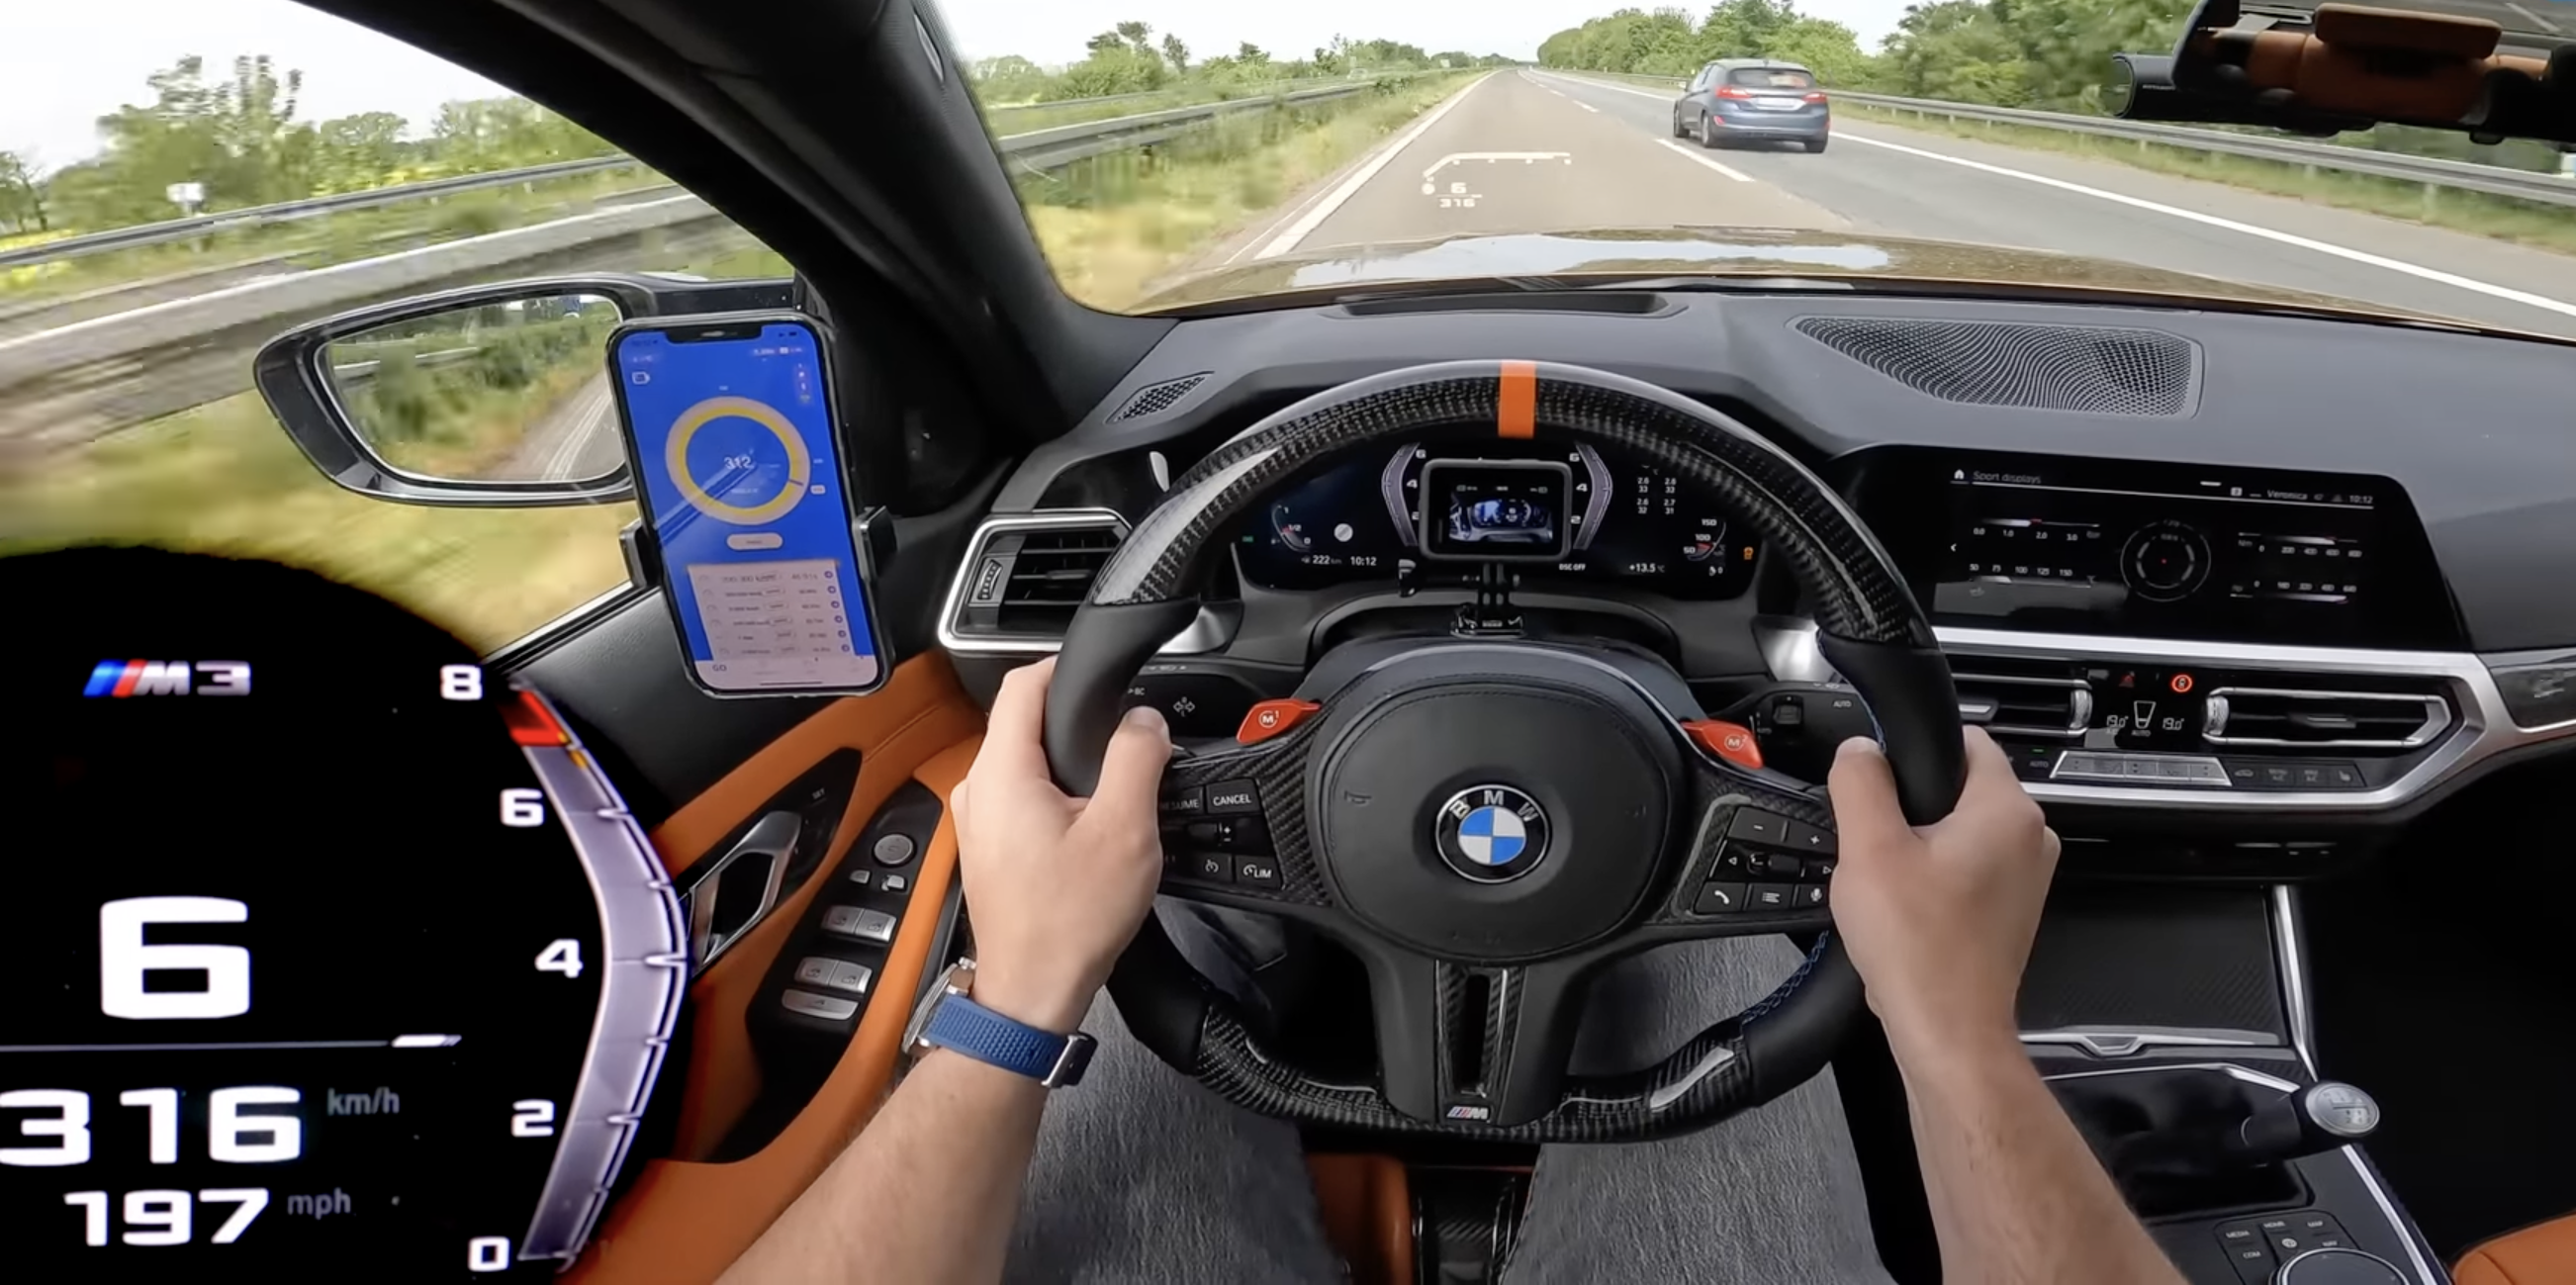 The New BMW M3 Can Hit Nearly 200 MPH With Its Speed Limiter Removed